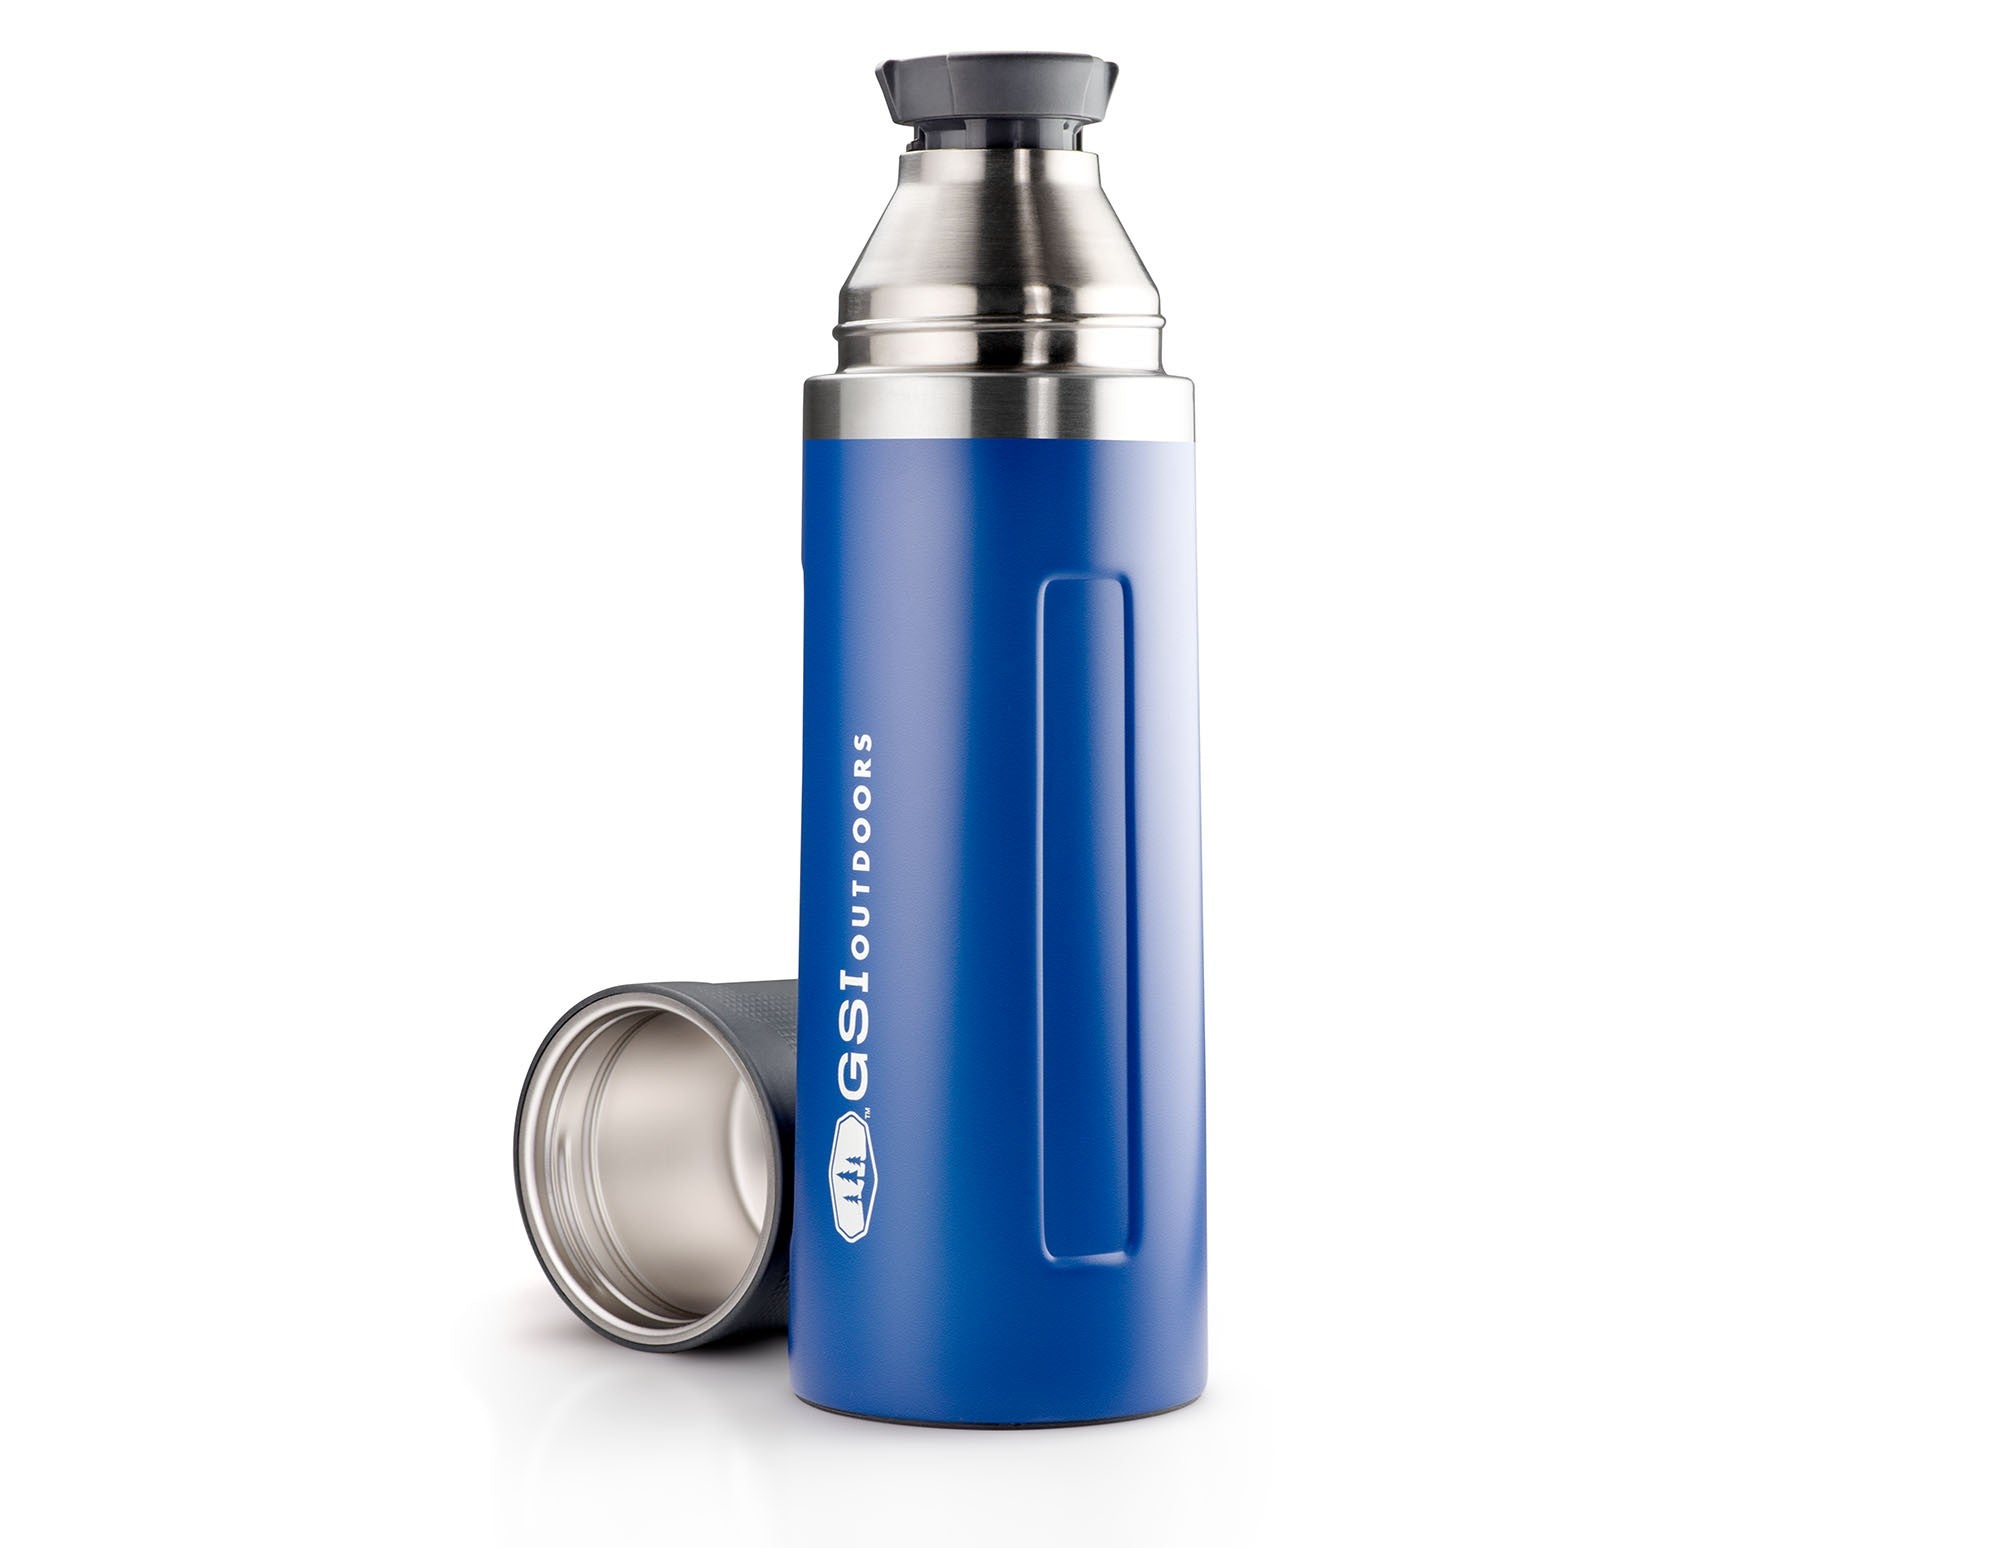 SeaTrees Microlite 720 Flip Insulated Water Bottle